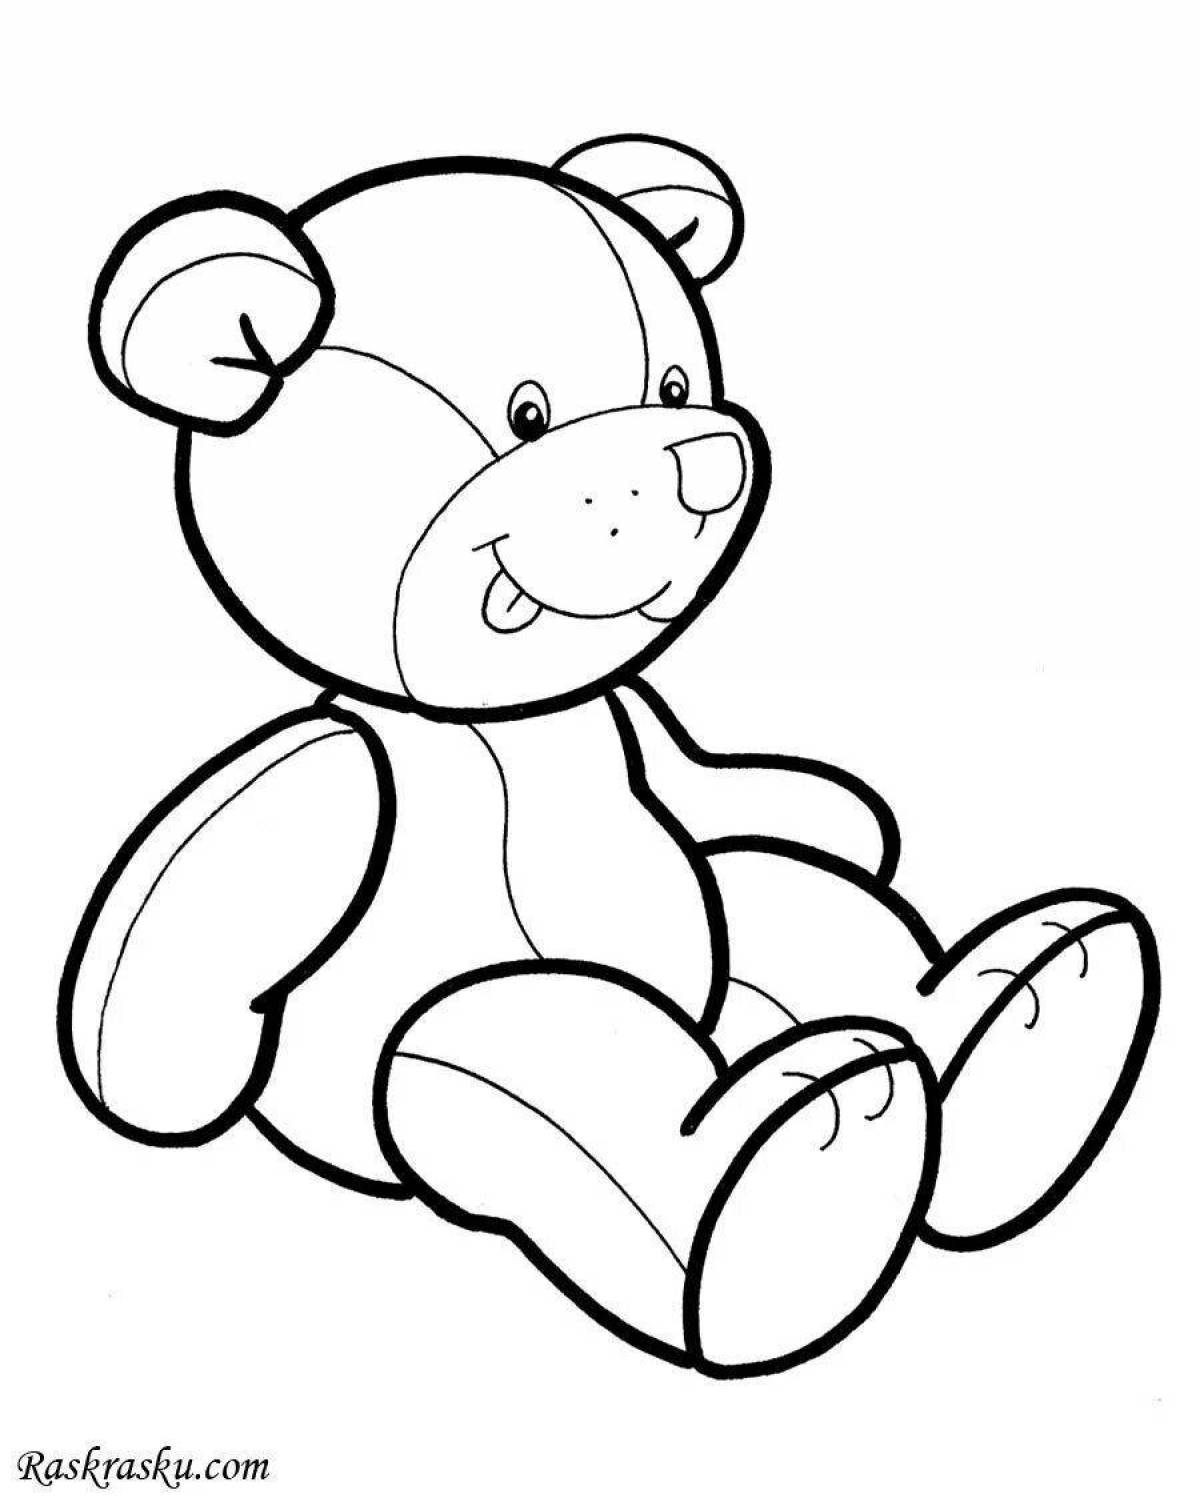 Cute teddy bear coloring book for kids